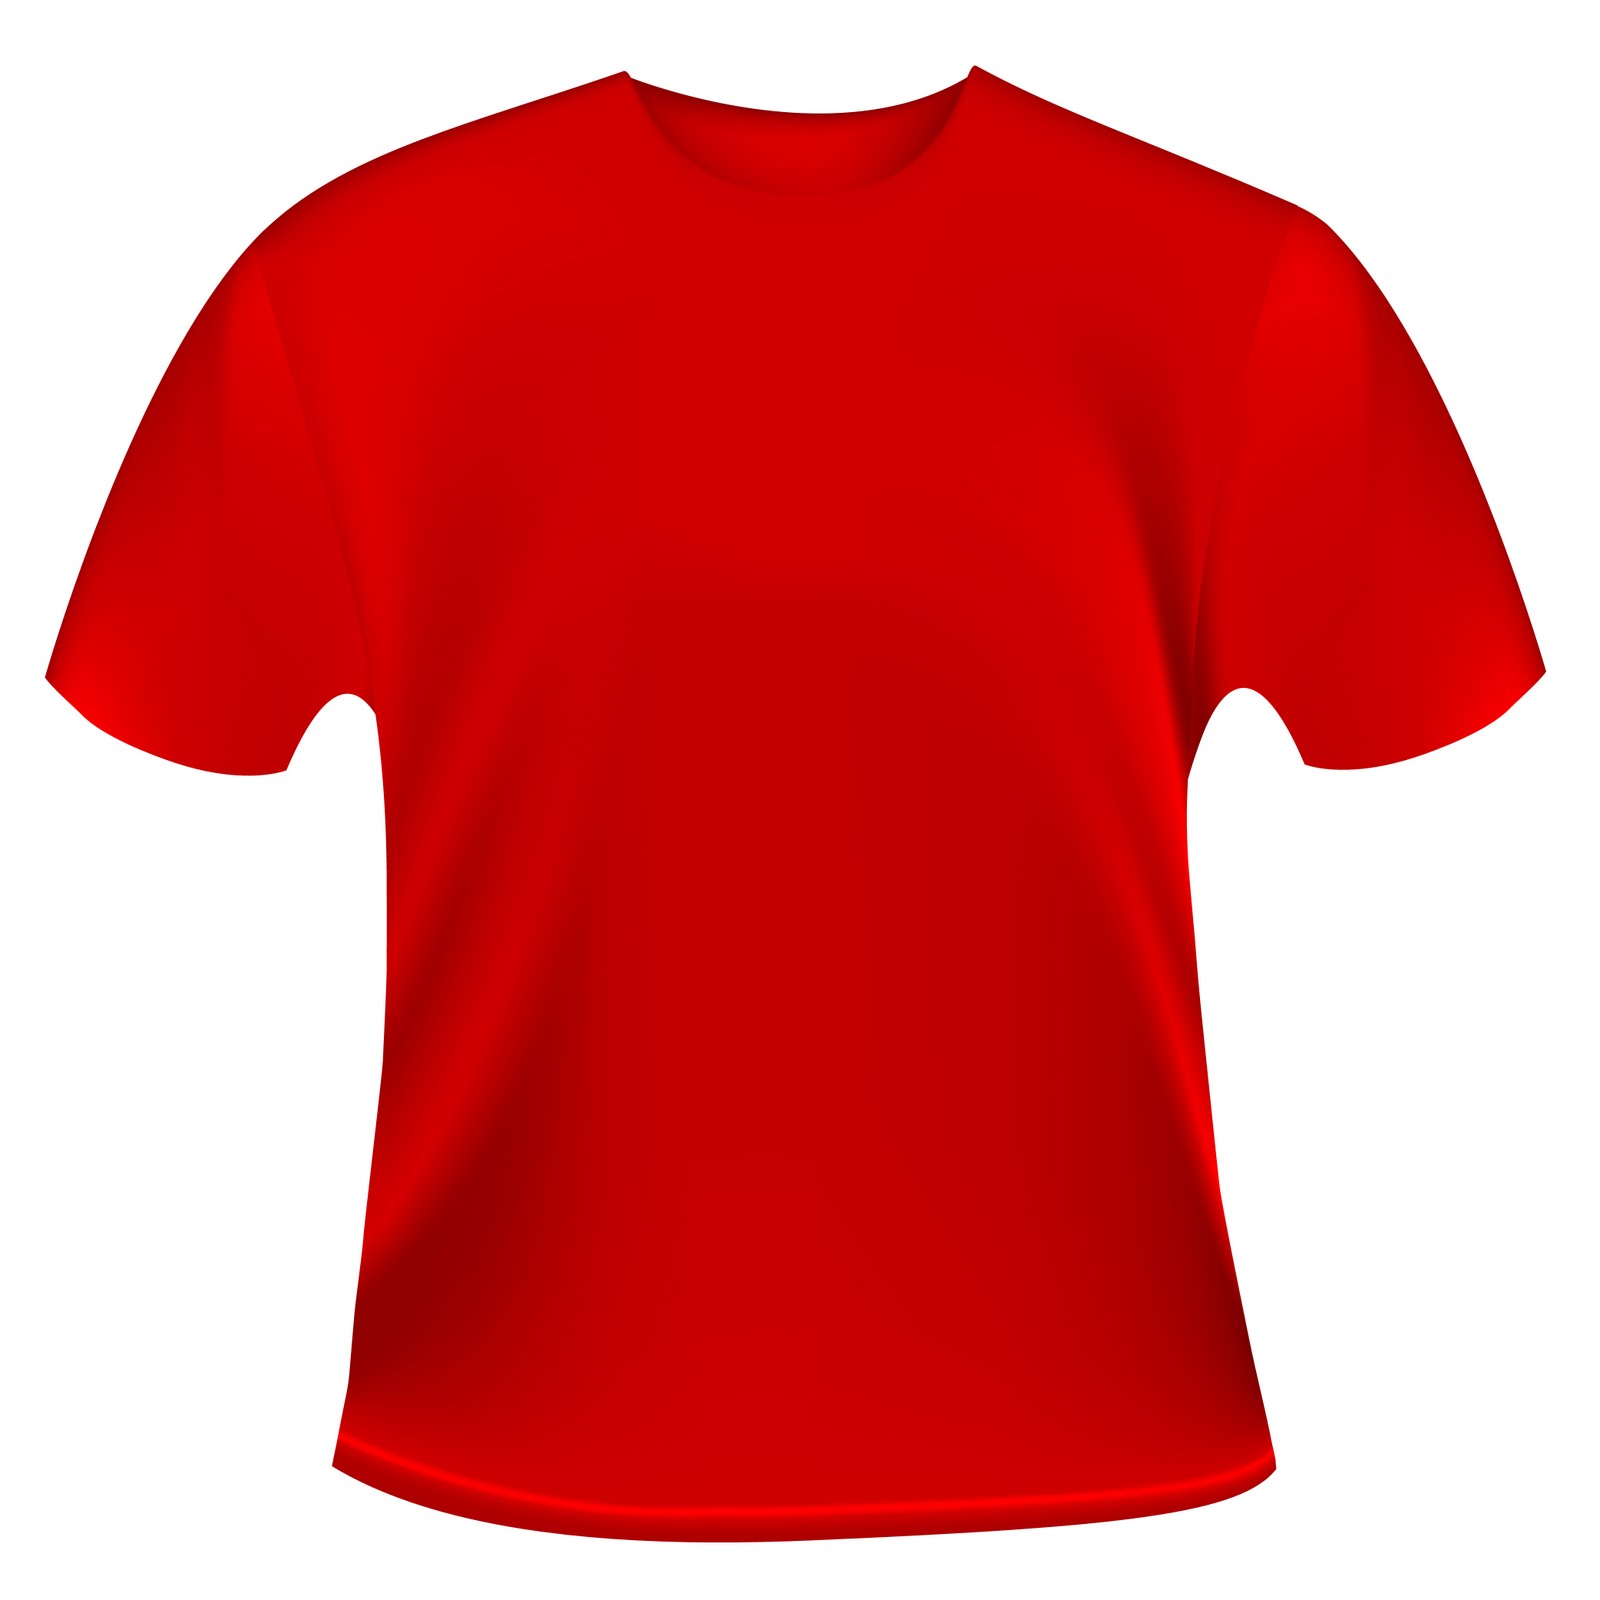 blank-t-shirt-template-for-colouring-clipart-best